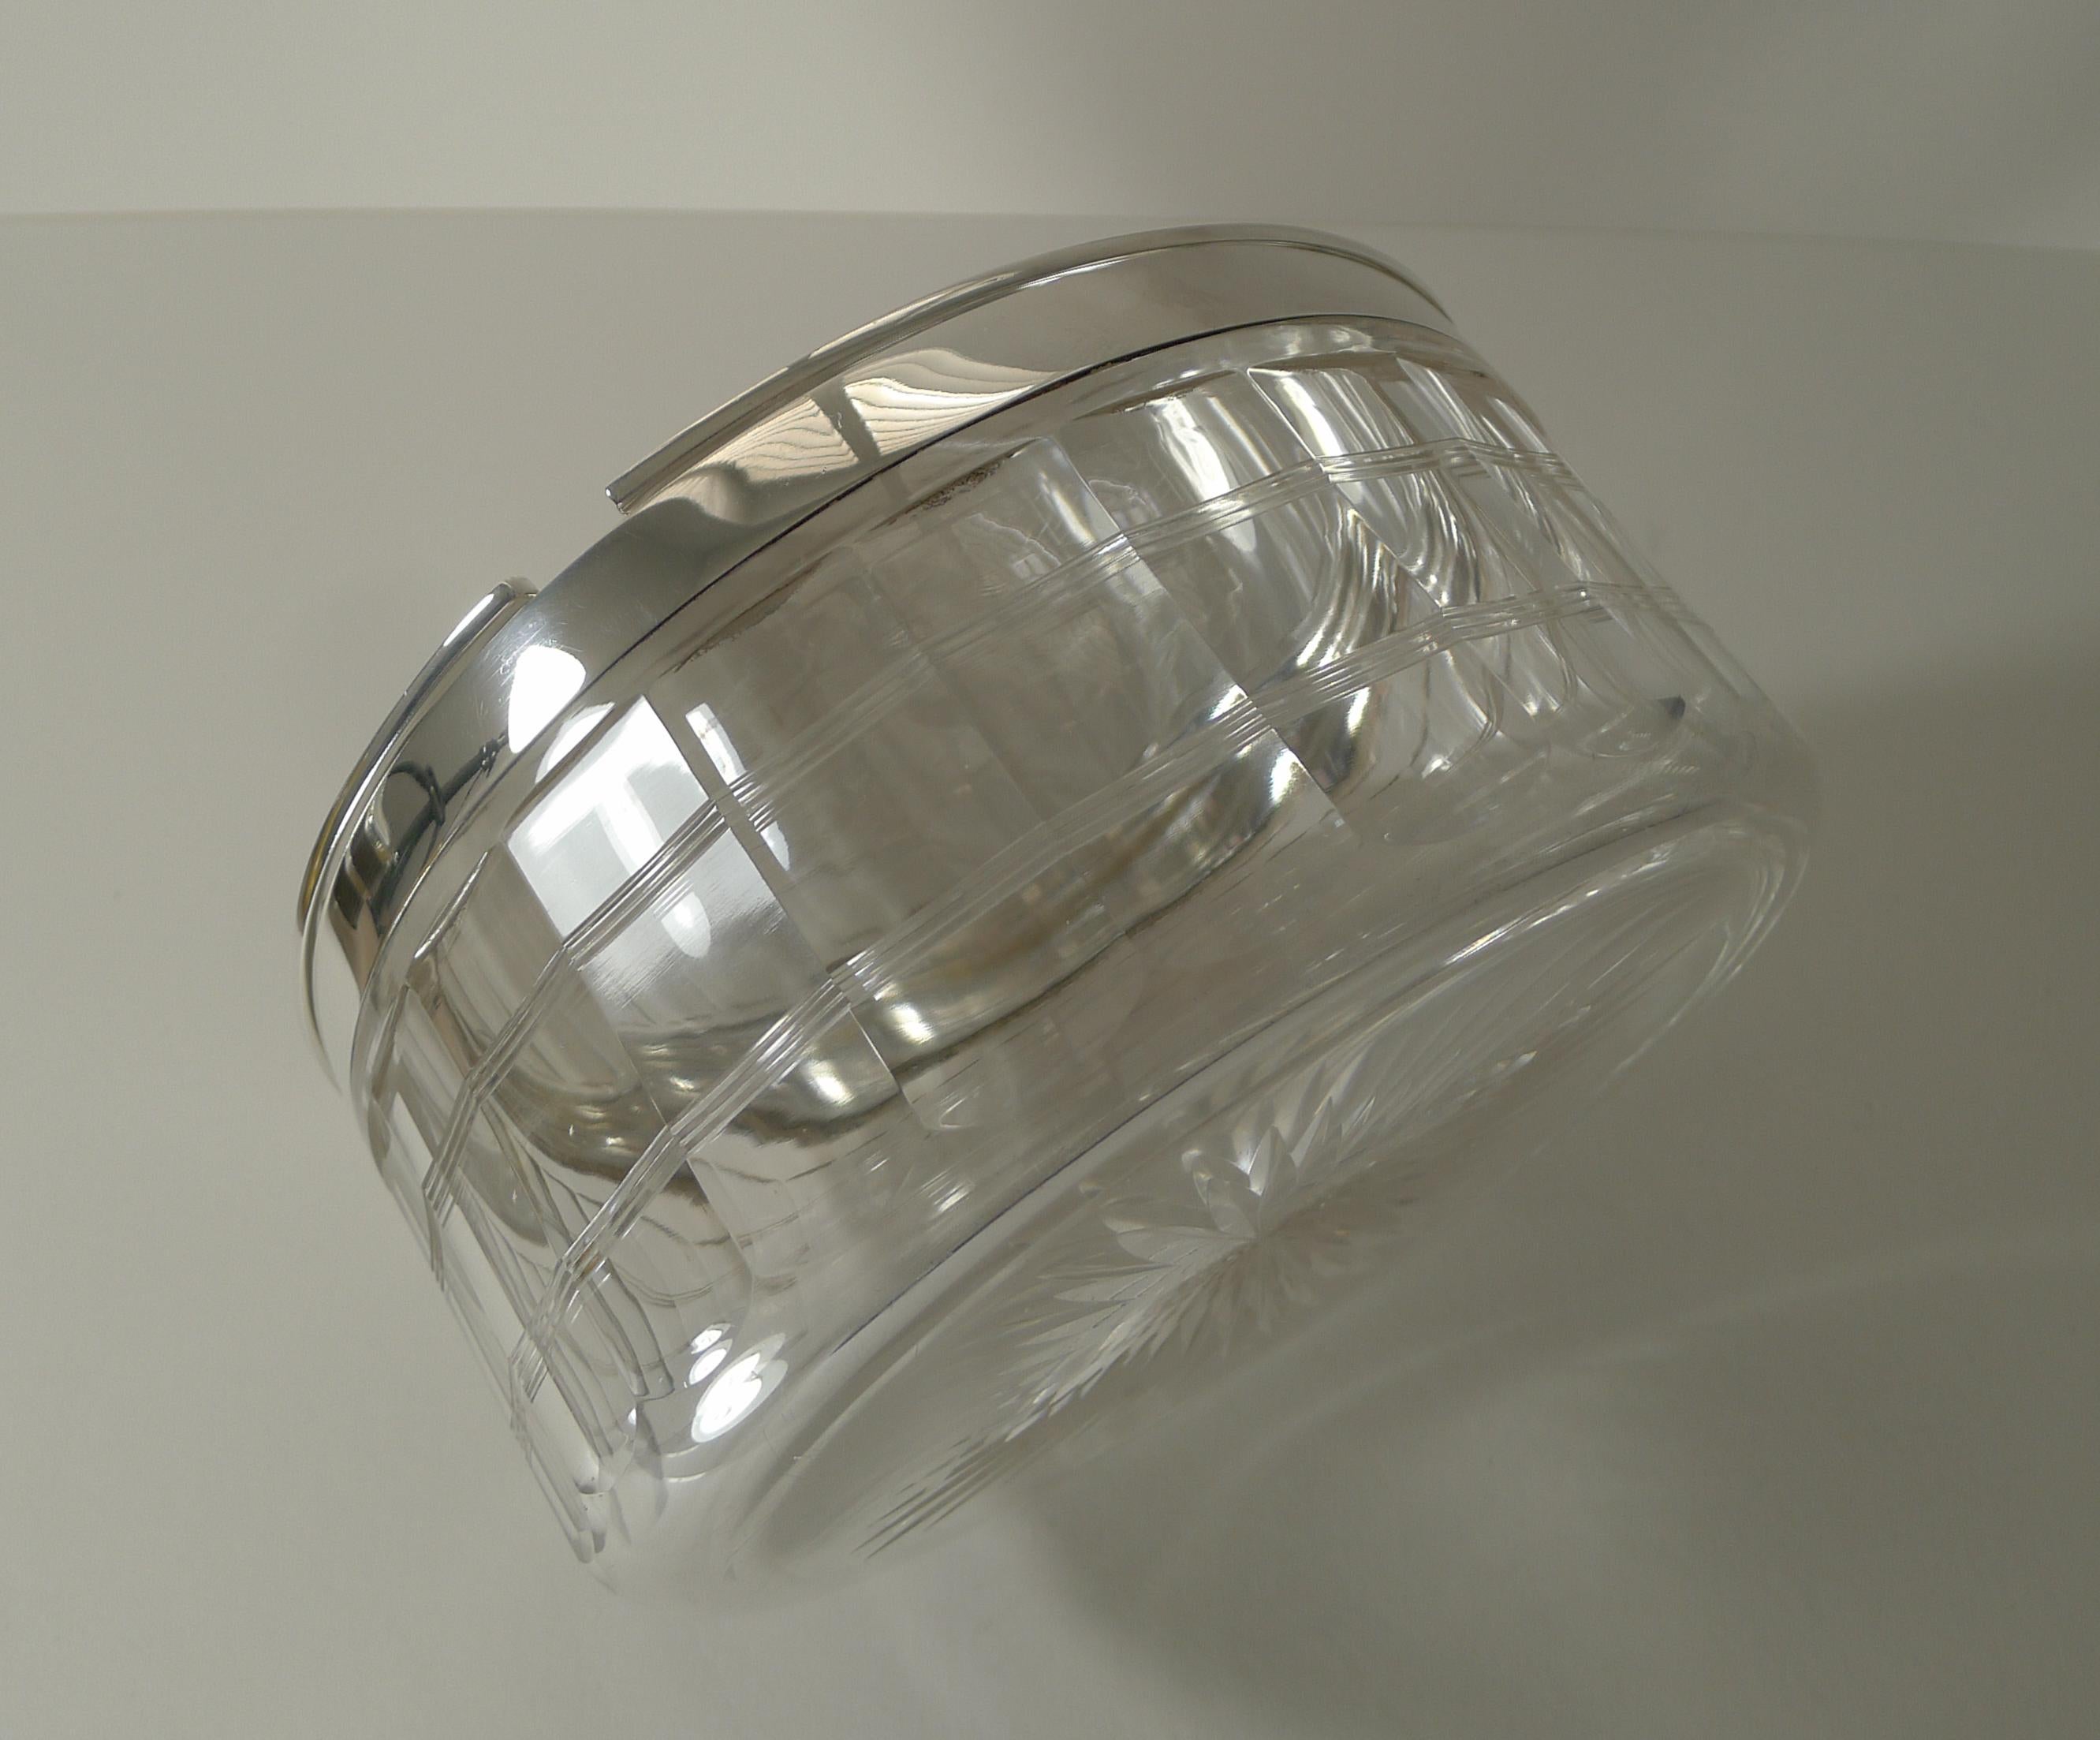 Unusual Scottish Cut Glass and Silver Plated Lidded Serving Dish c.1920 For Sale 2